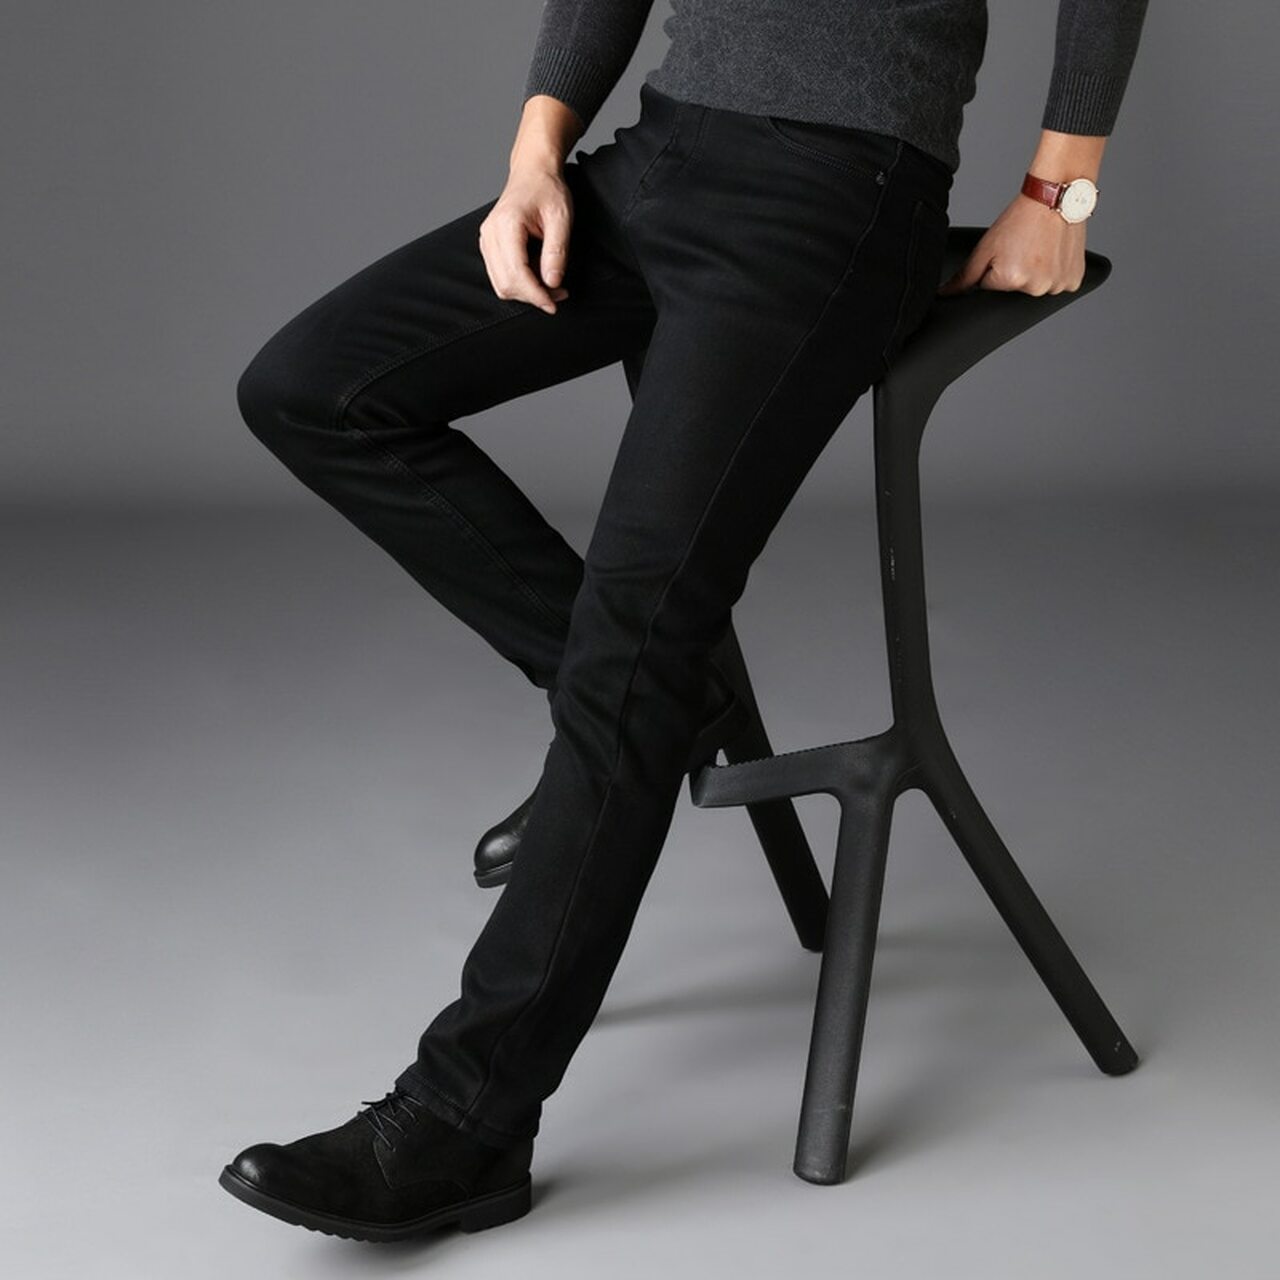 What Kind Of Material Is Used In Manufacturing Men’s Stretch Jeans? post thumbnail image